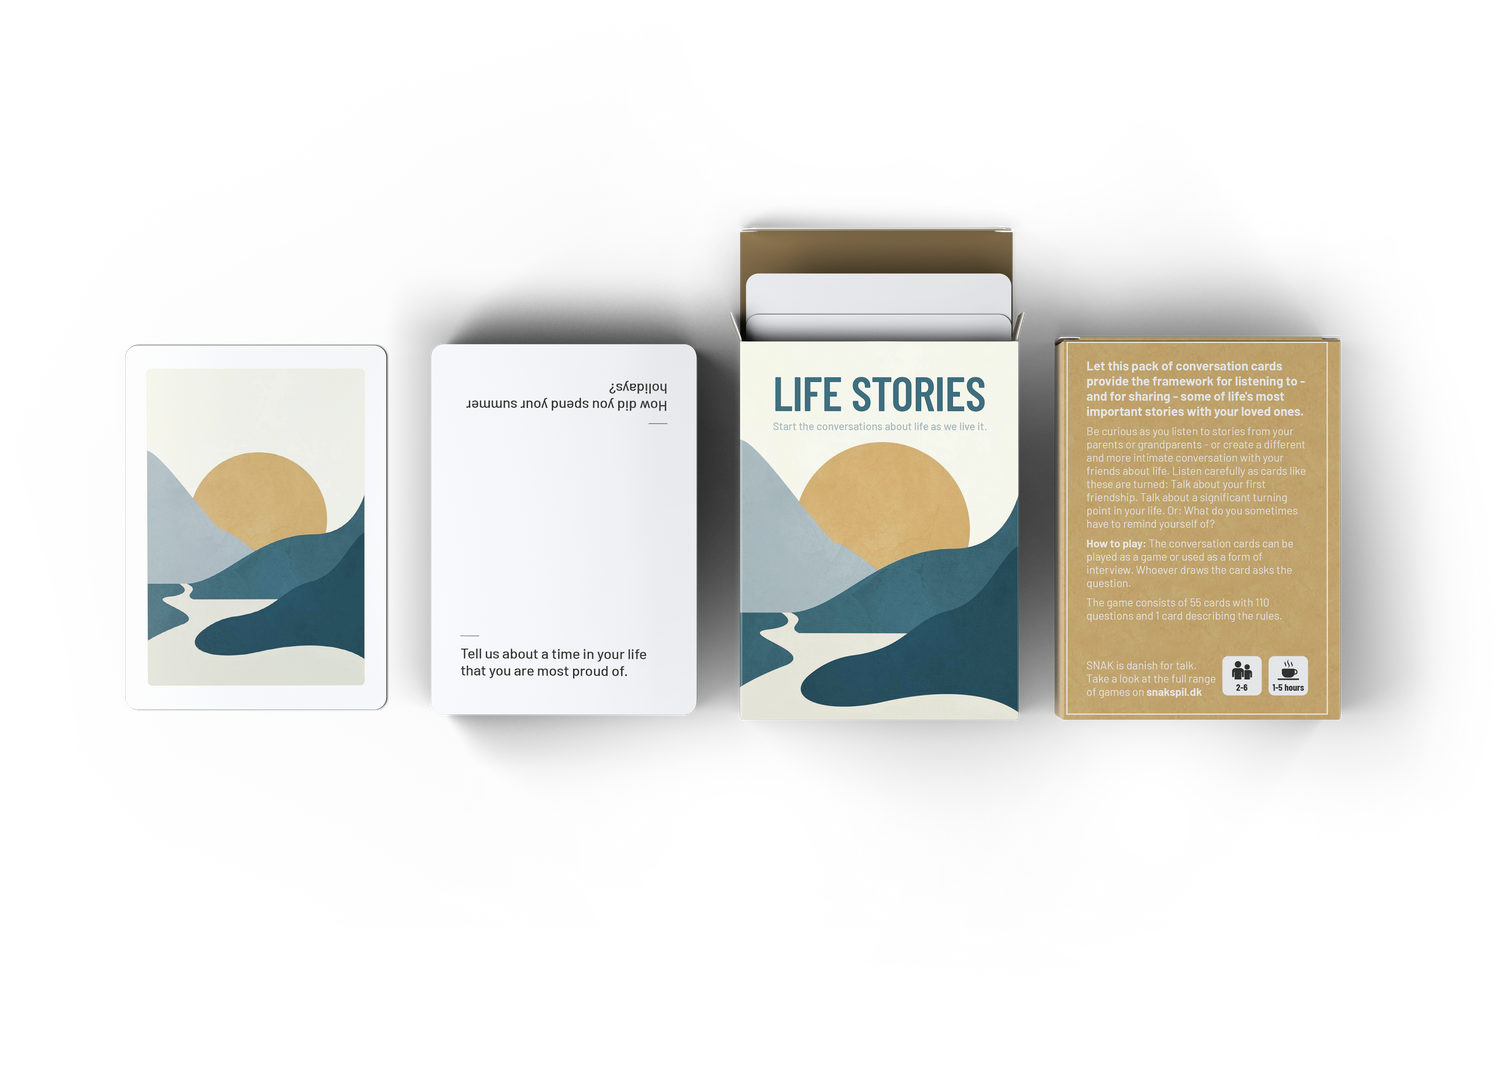 LIFE STORIES - Start the conversations about life as we live it.